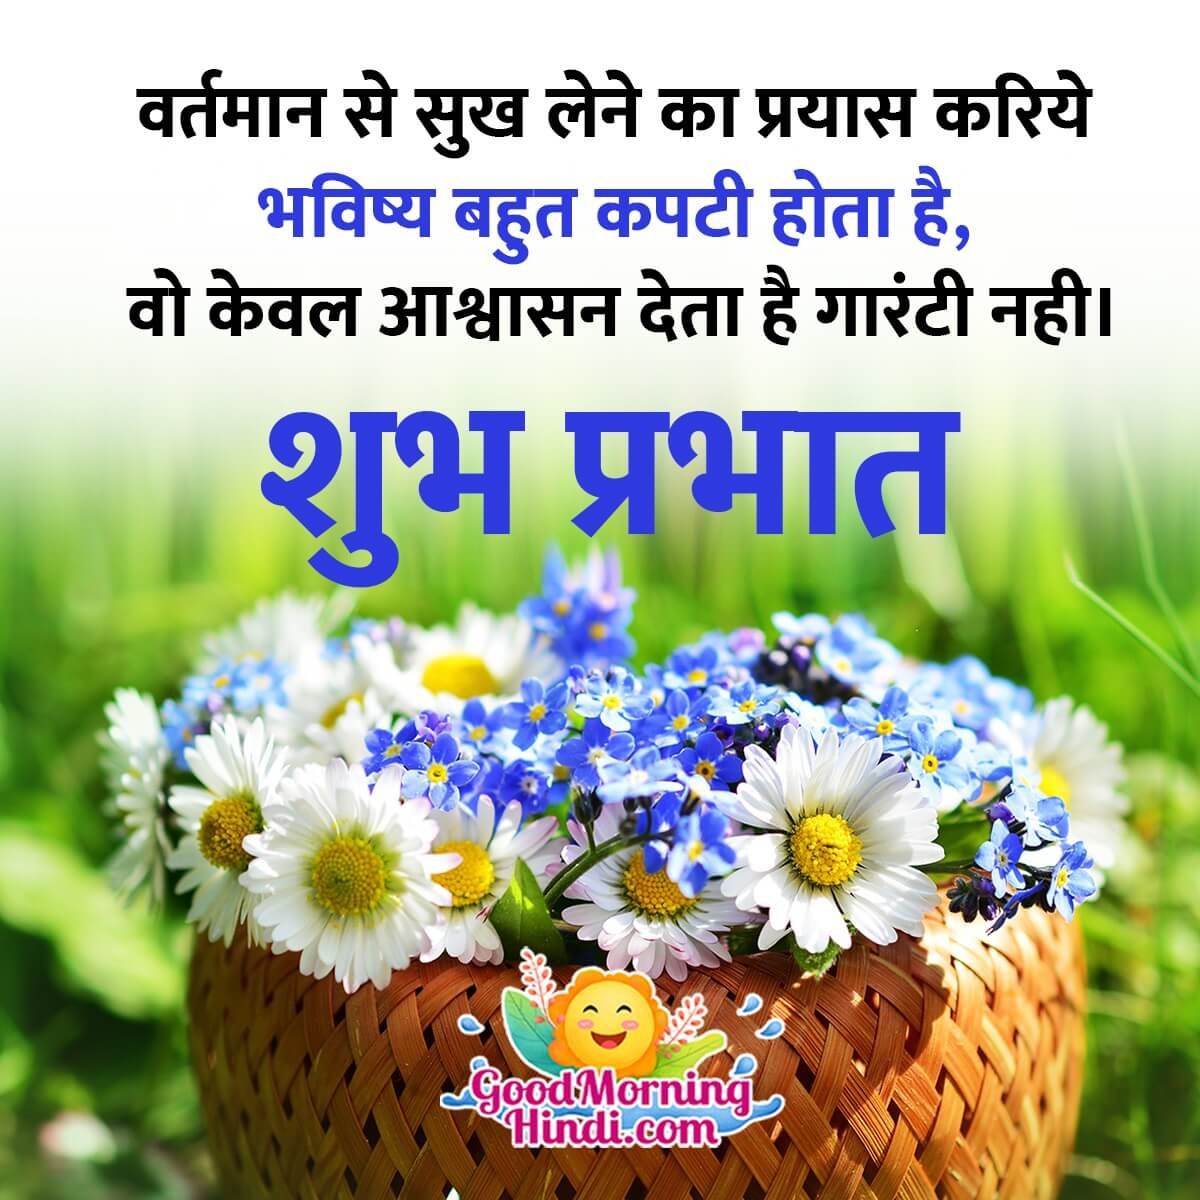 Top 999+ good morning images with quotes hindi – Amazing Collection good morning images with quotes hindi Full 4K